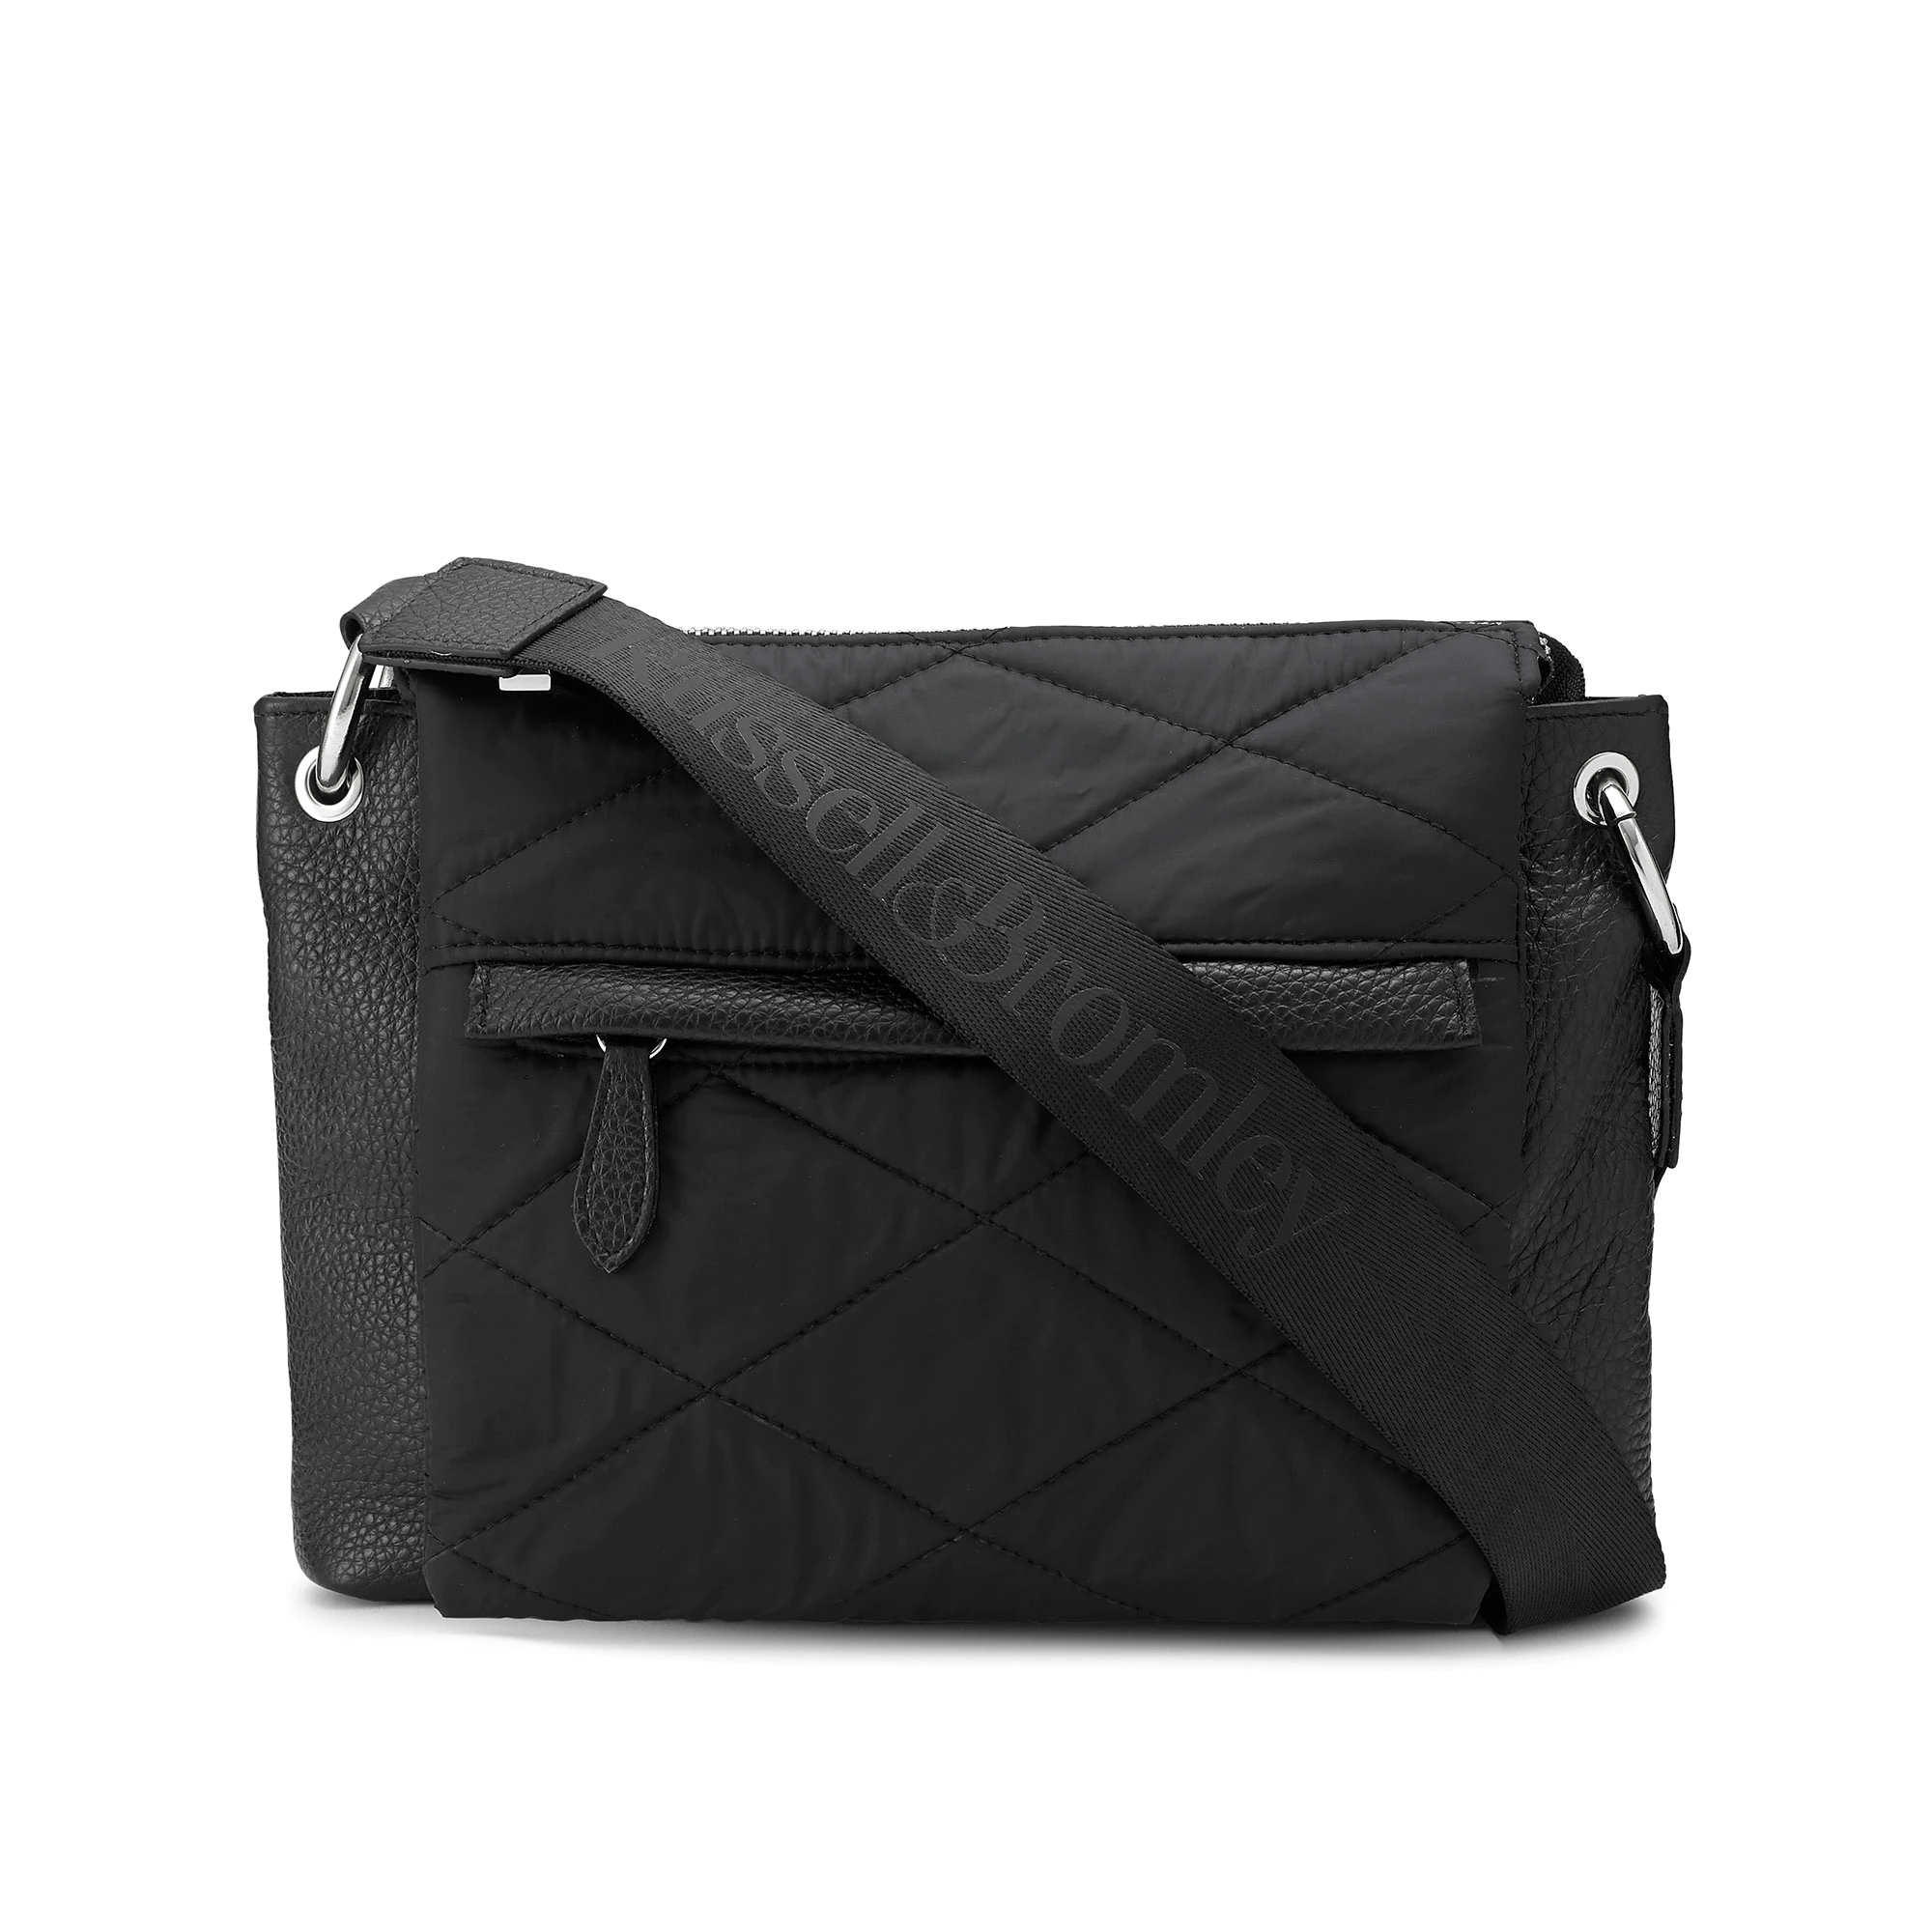 Russell And Bromley TROOPER Multi Pocket Crossbody Black 706472